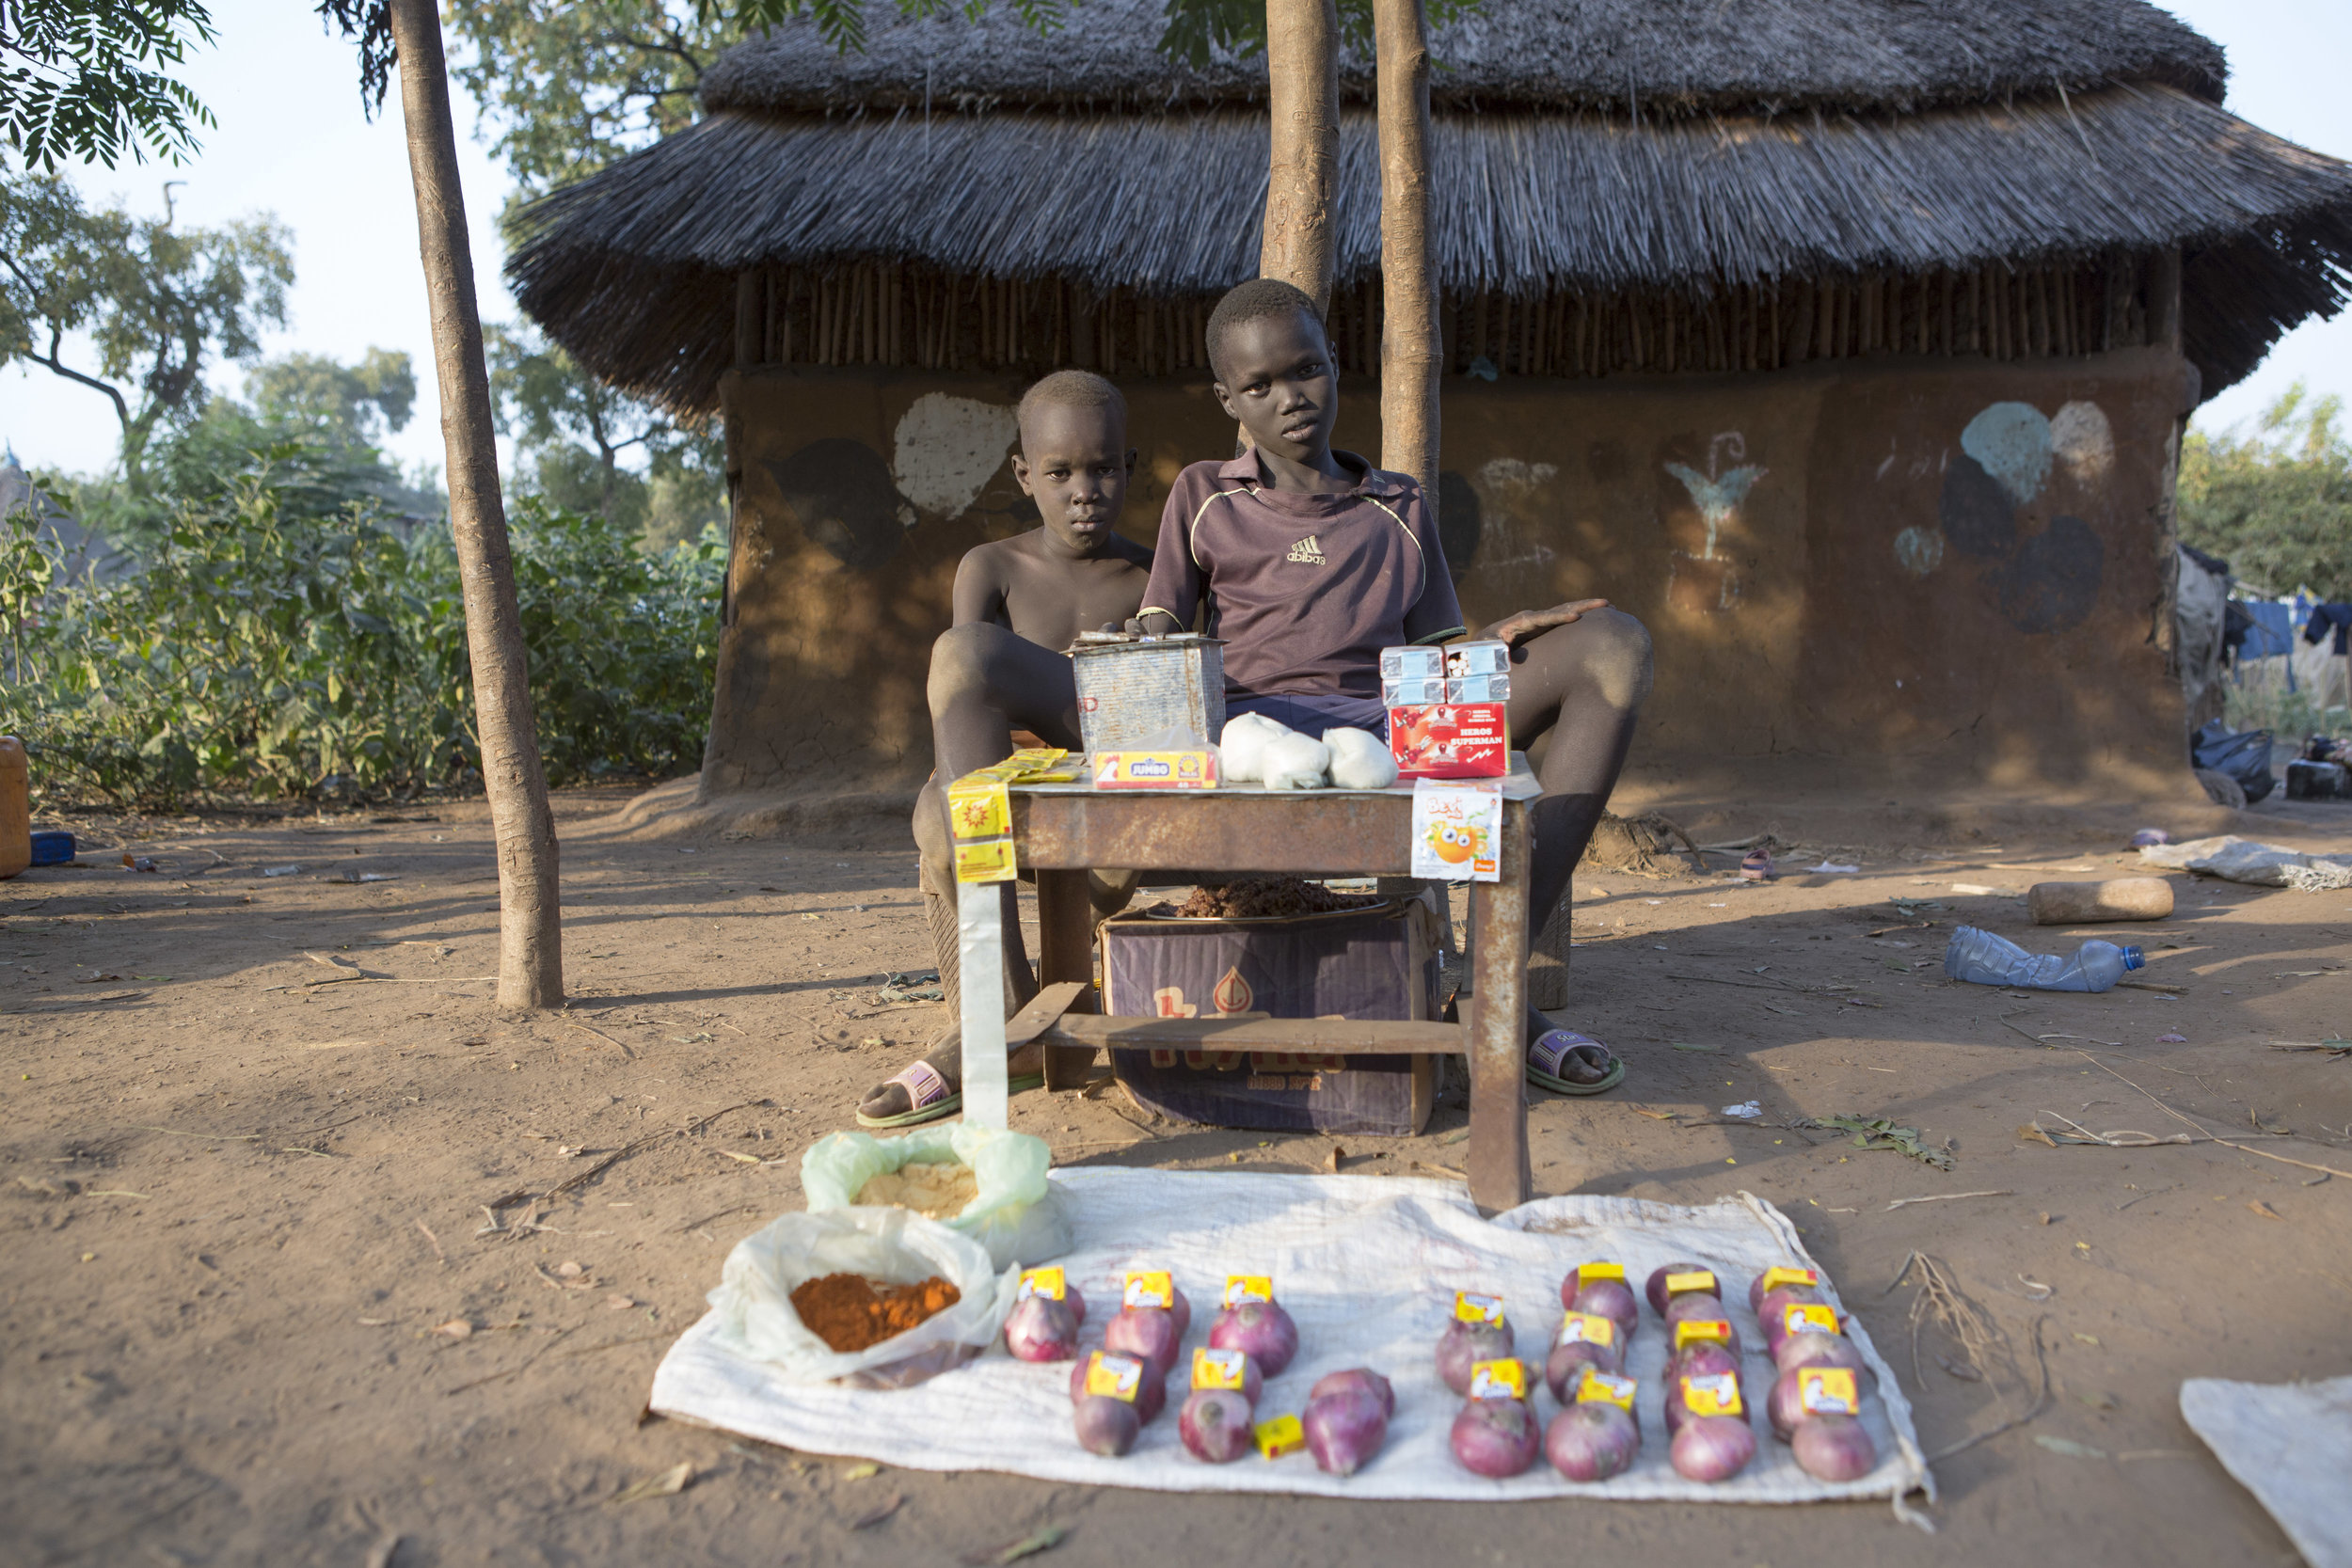  Two young boys sell goods outside of their family's home in the Kule Refugee camp for South Sudanese in the Gambella region of Ethiopia on 25 Nov 2017. MSF / Zacharias Abubeker 